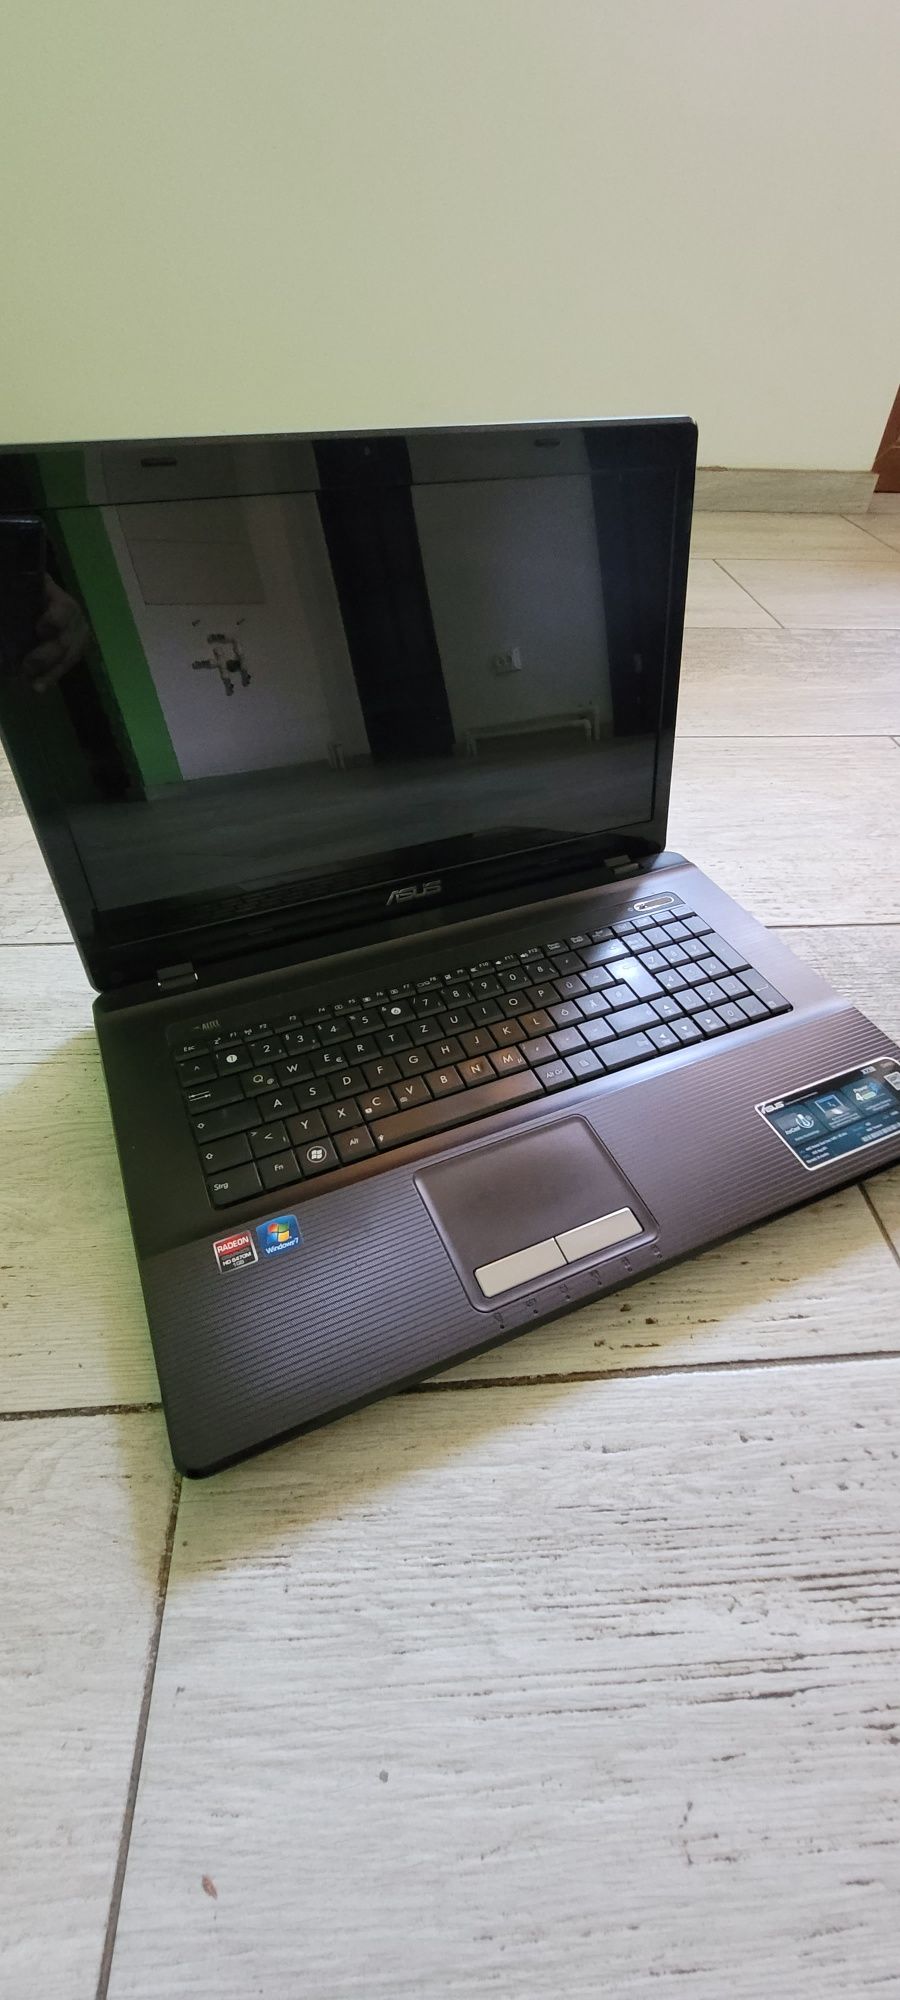 Laptop asus 17 inch, 4gb ddr3, video 1gb, dual core